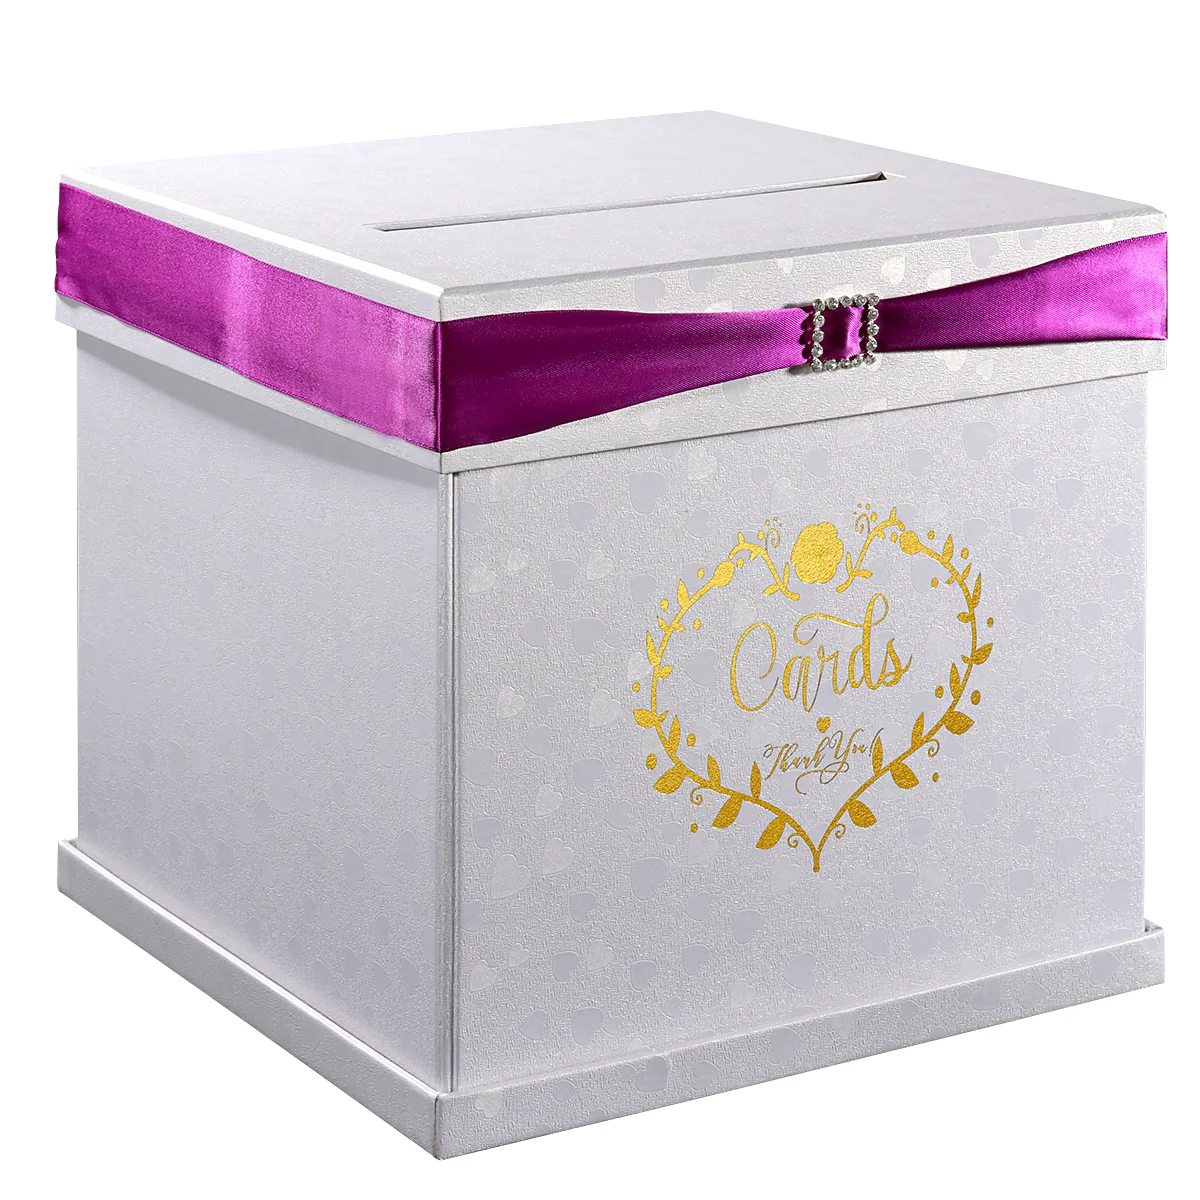 

UNOMOR Delicate Square Gift Box with Rhinestone Slider and Ribbon for Weddings Birthdays Graduations (White) Boxes Magnetic